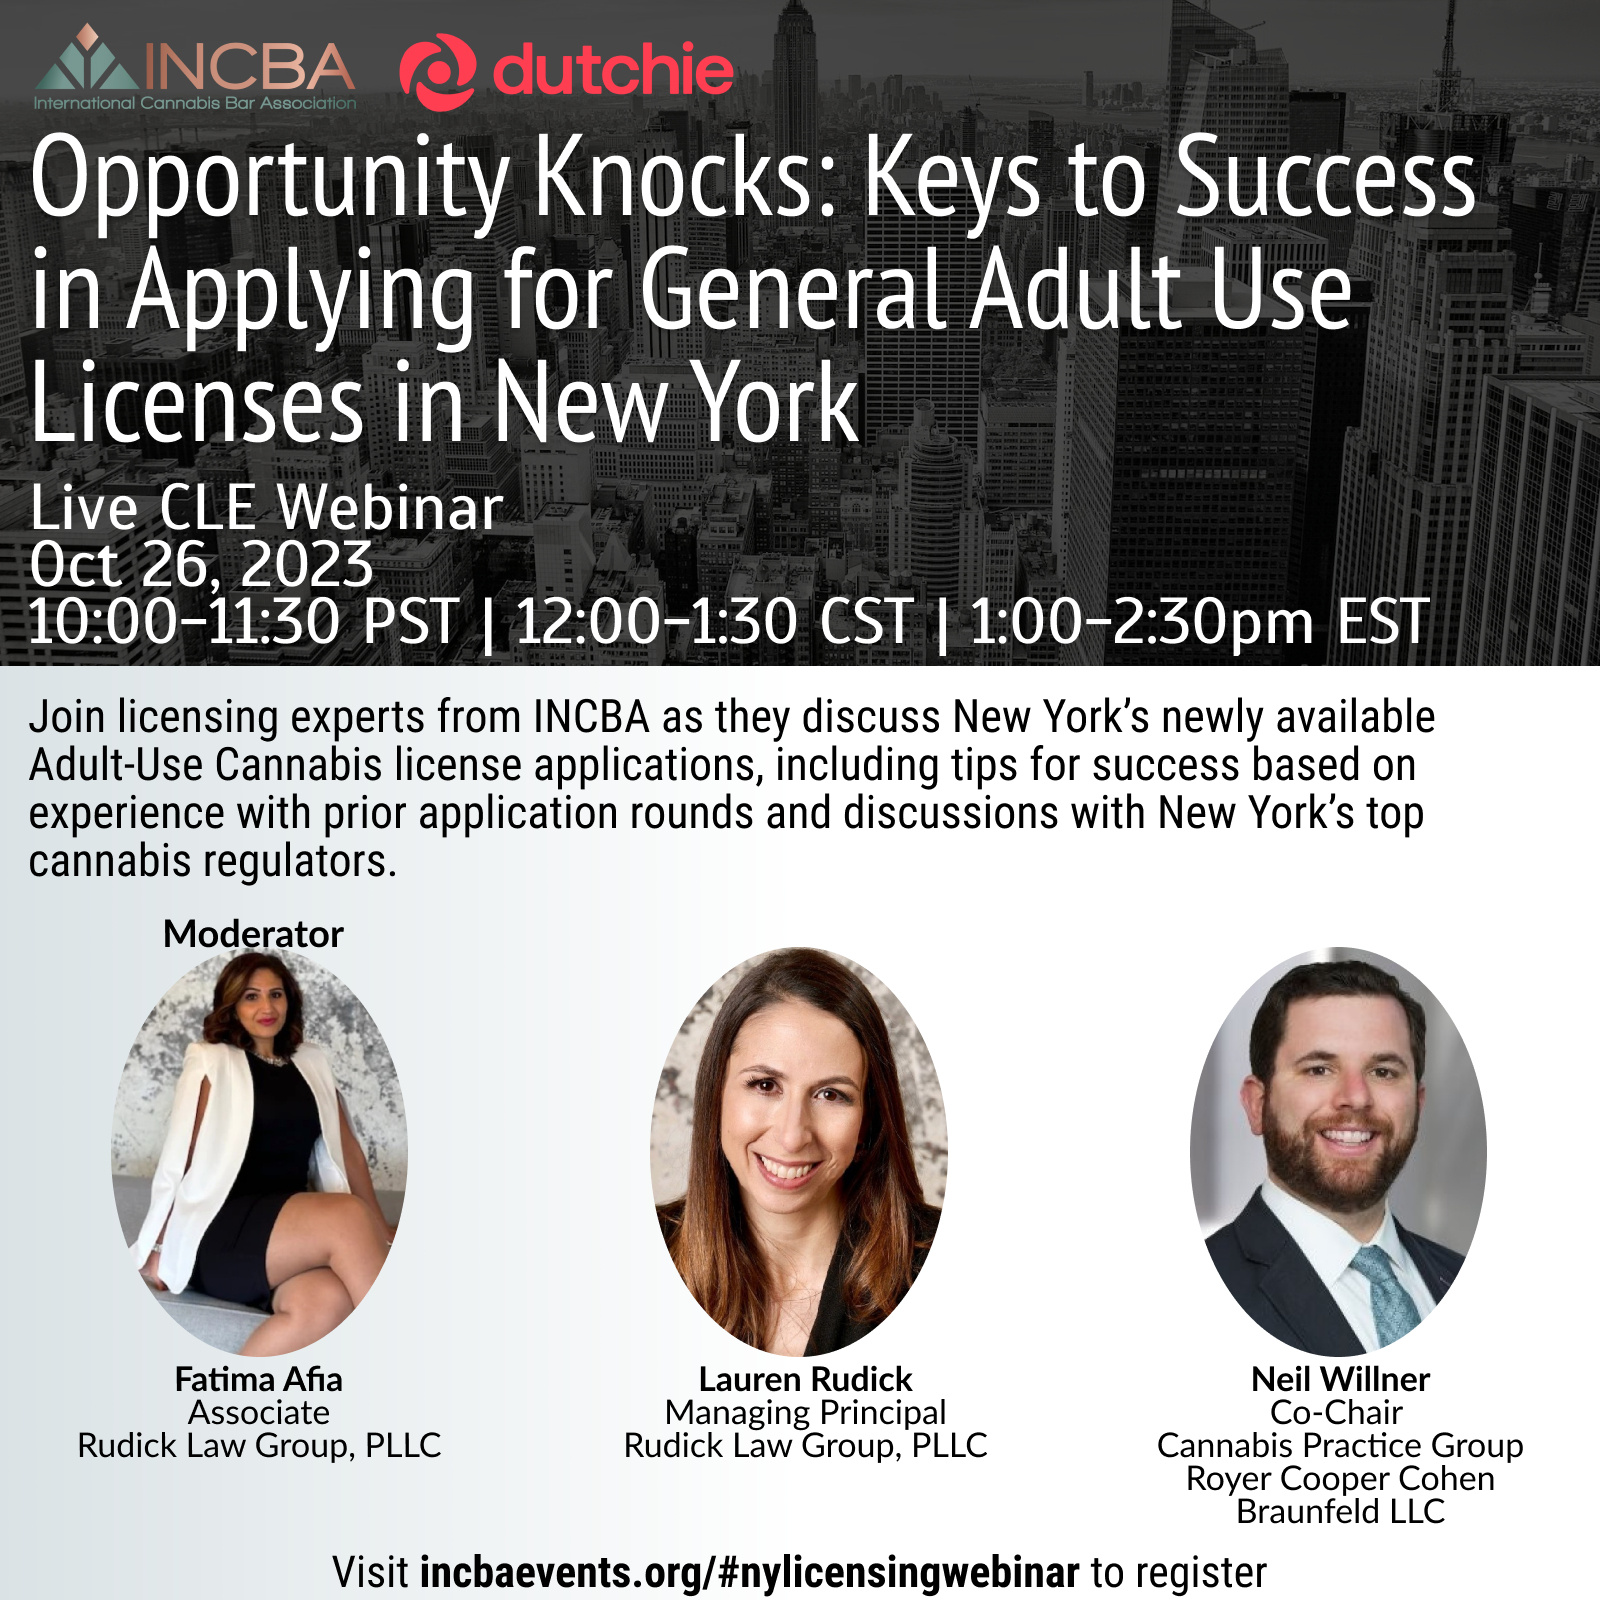 Opportunity Knocks: Keys to Success in Applying for General Adult Use Licenses in New York marketing graphic.